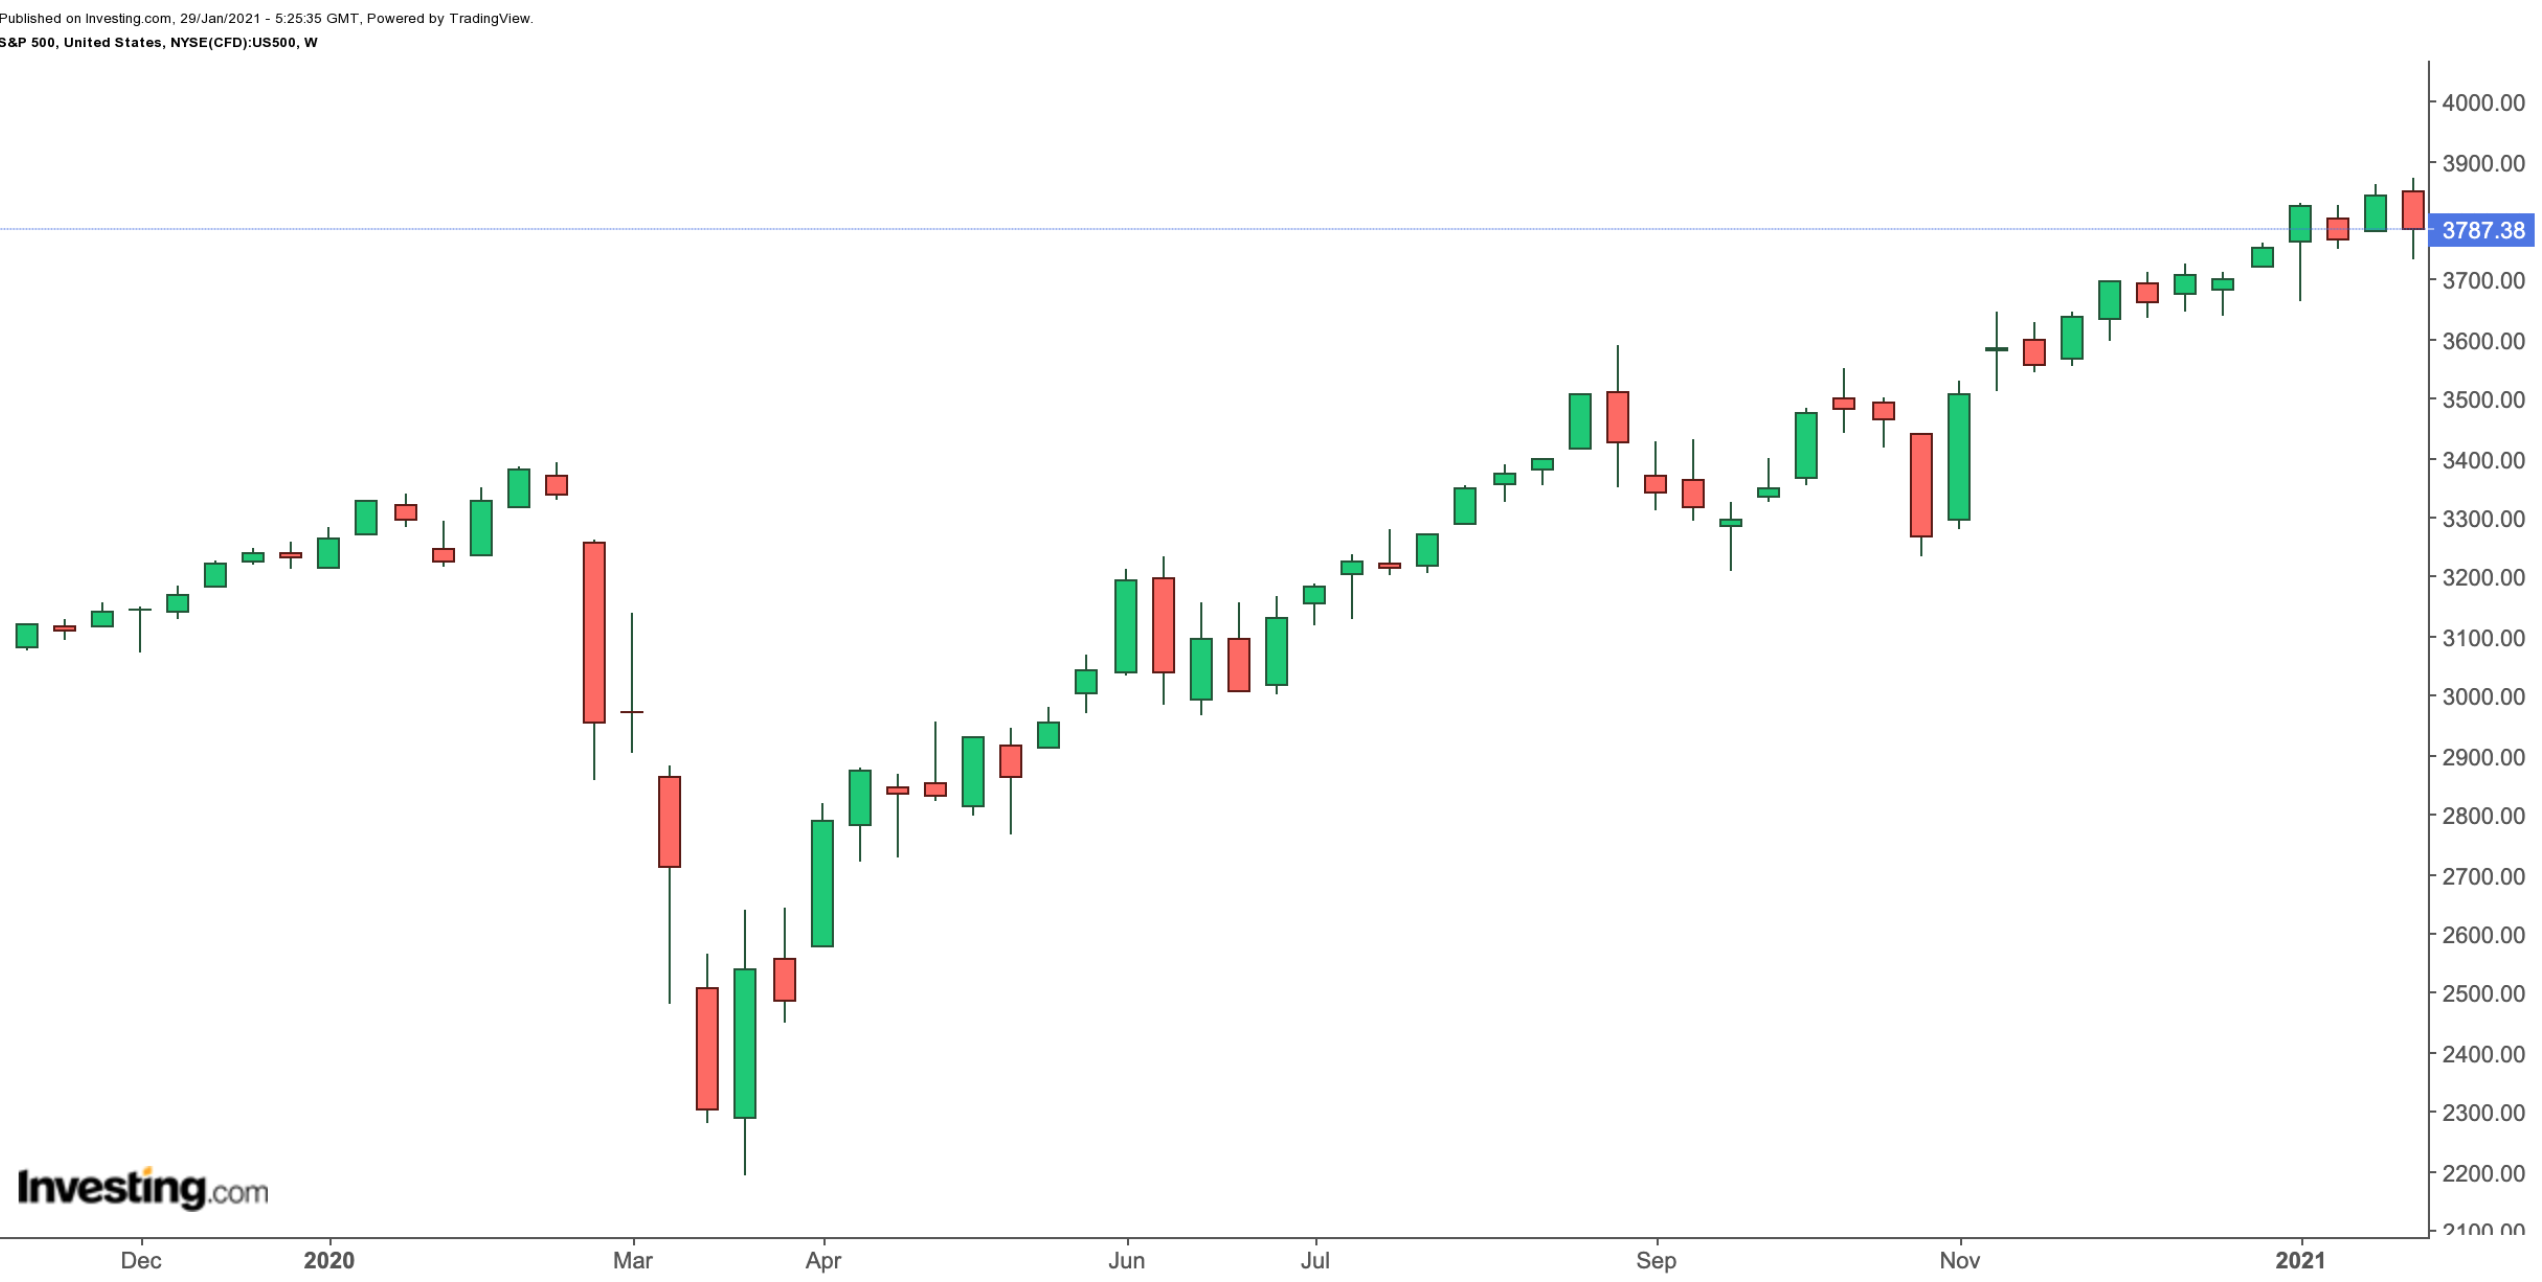 S&P 500 Weekly